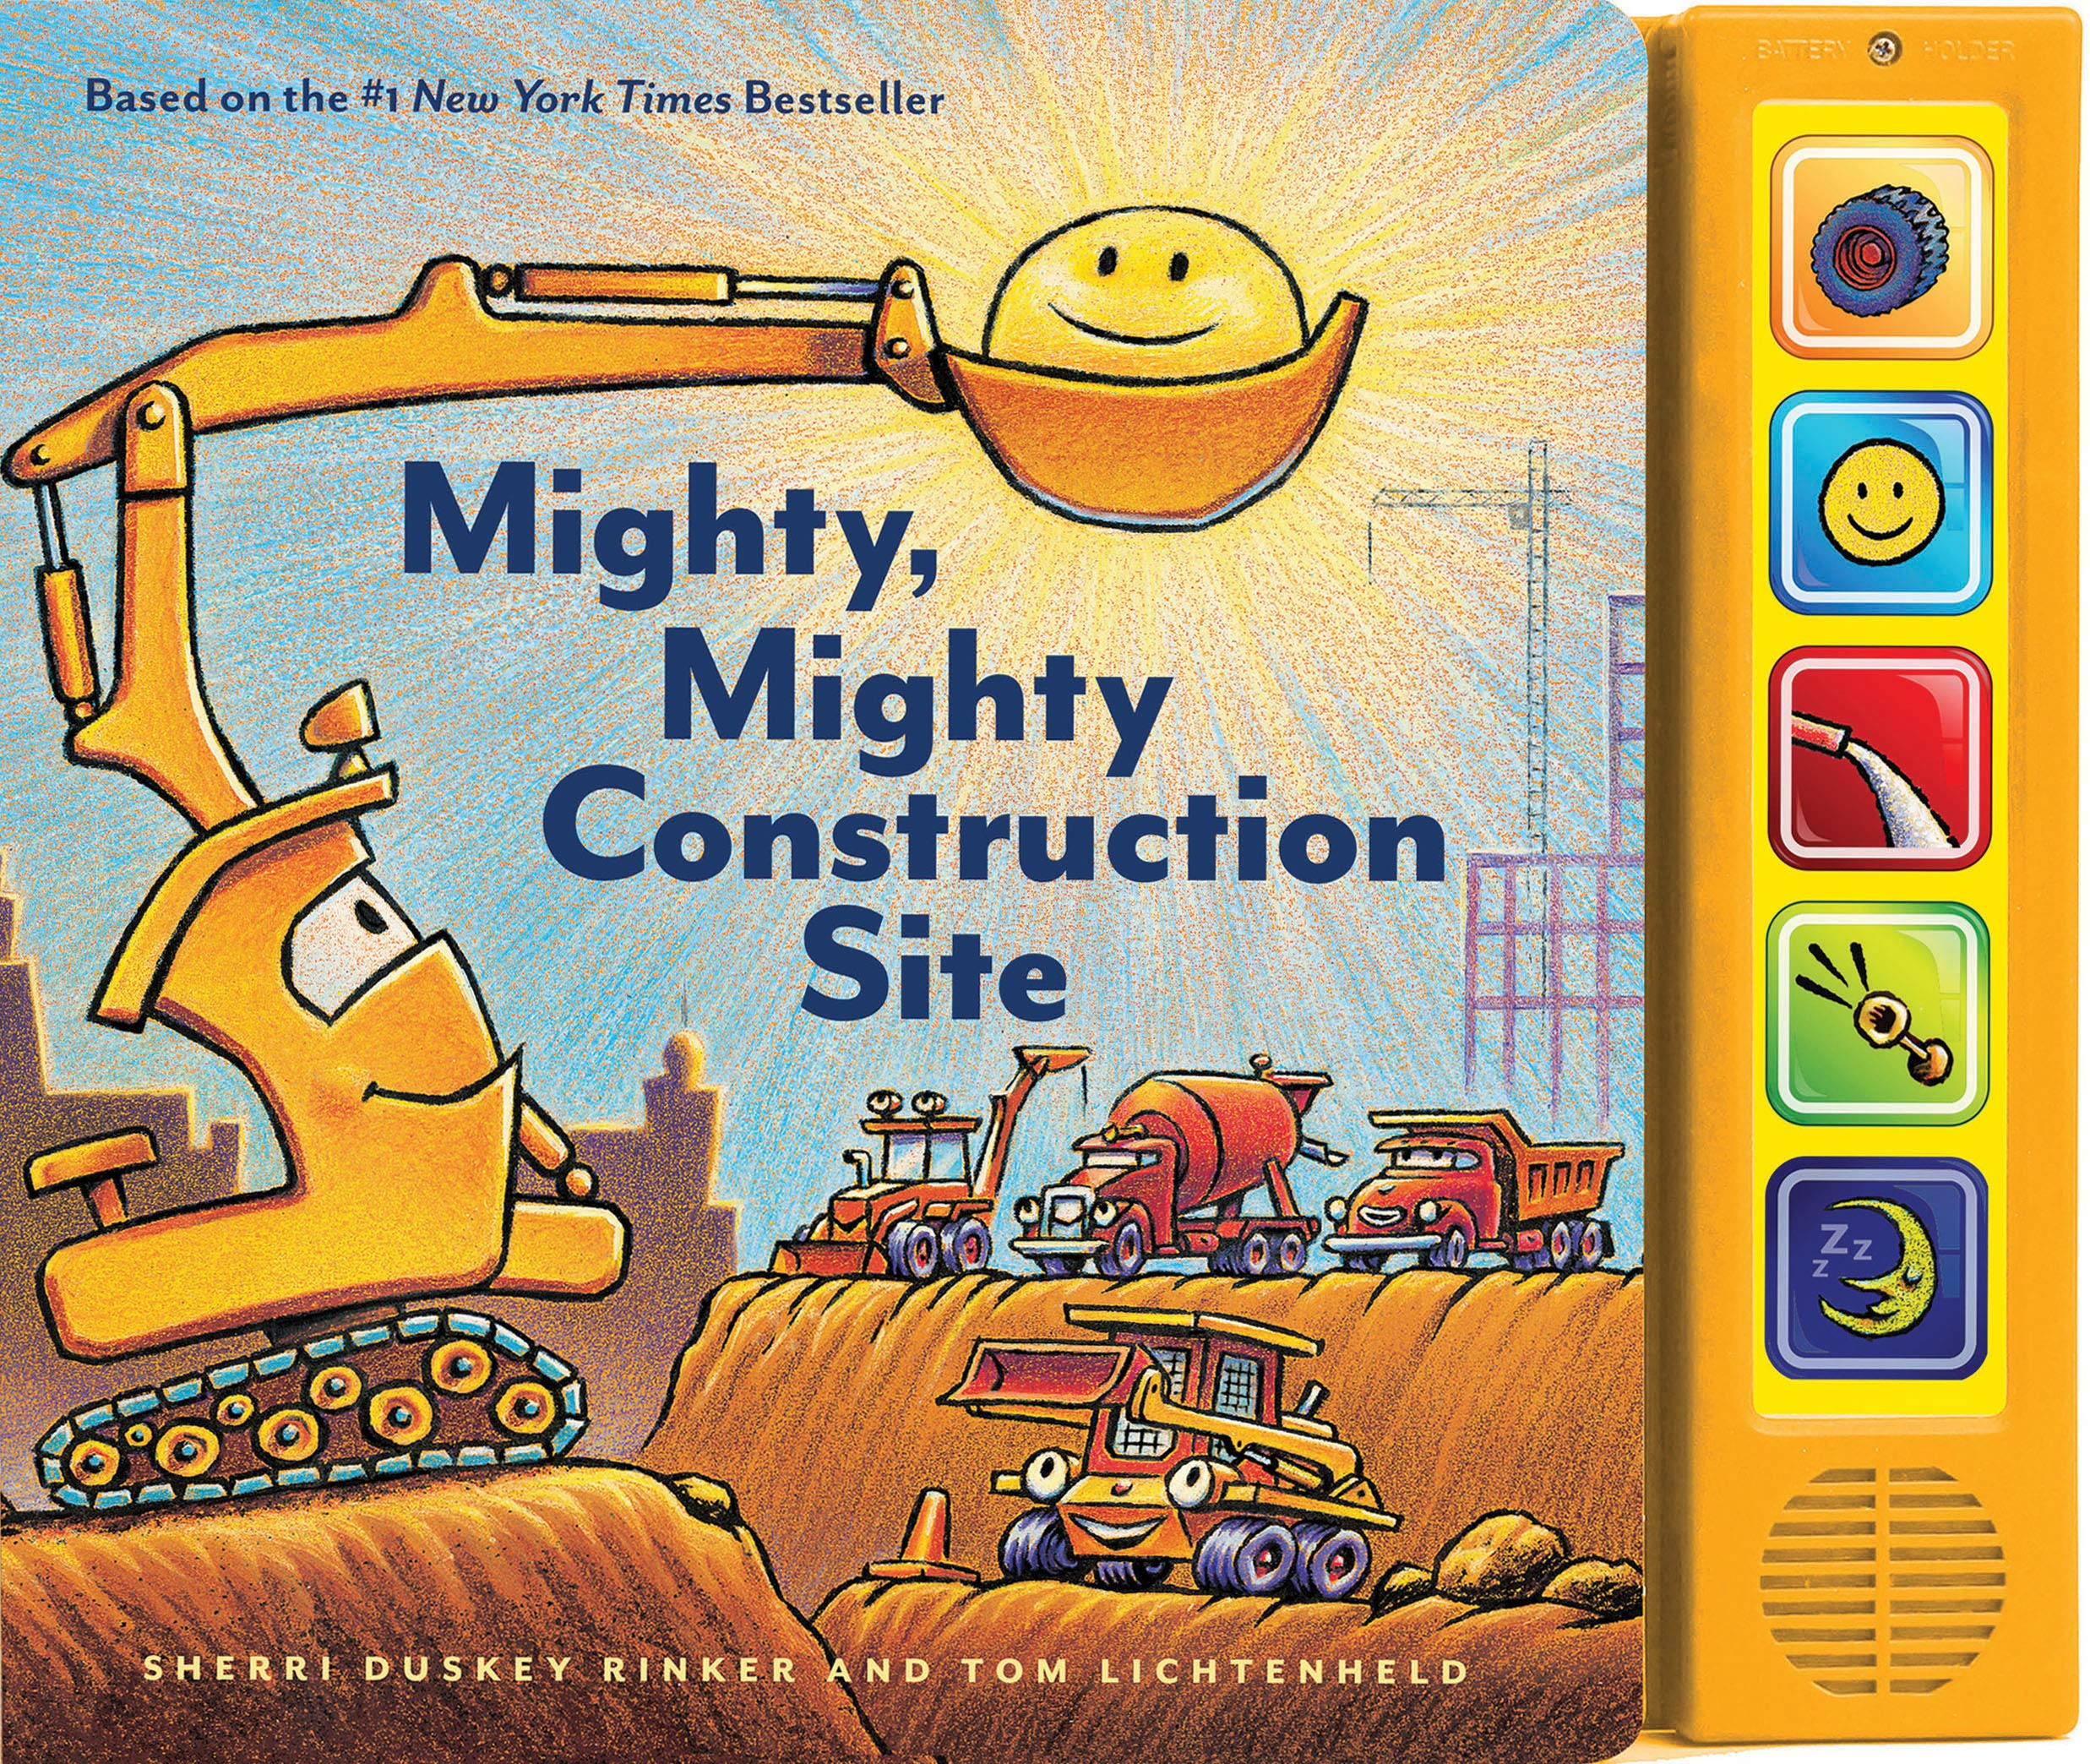 Mighty Mighty Construction Site Sound Book